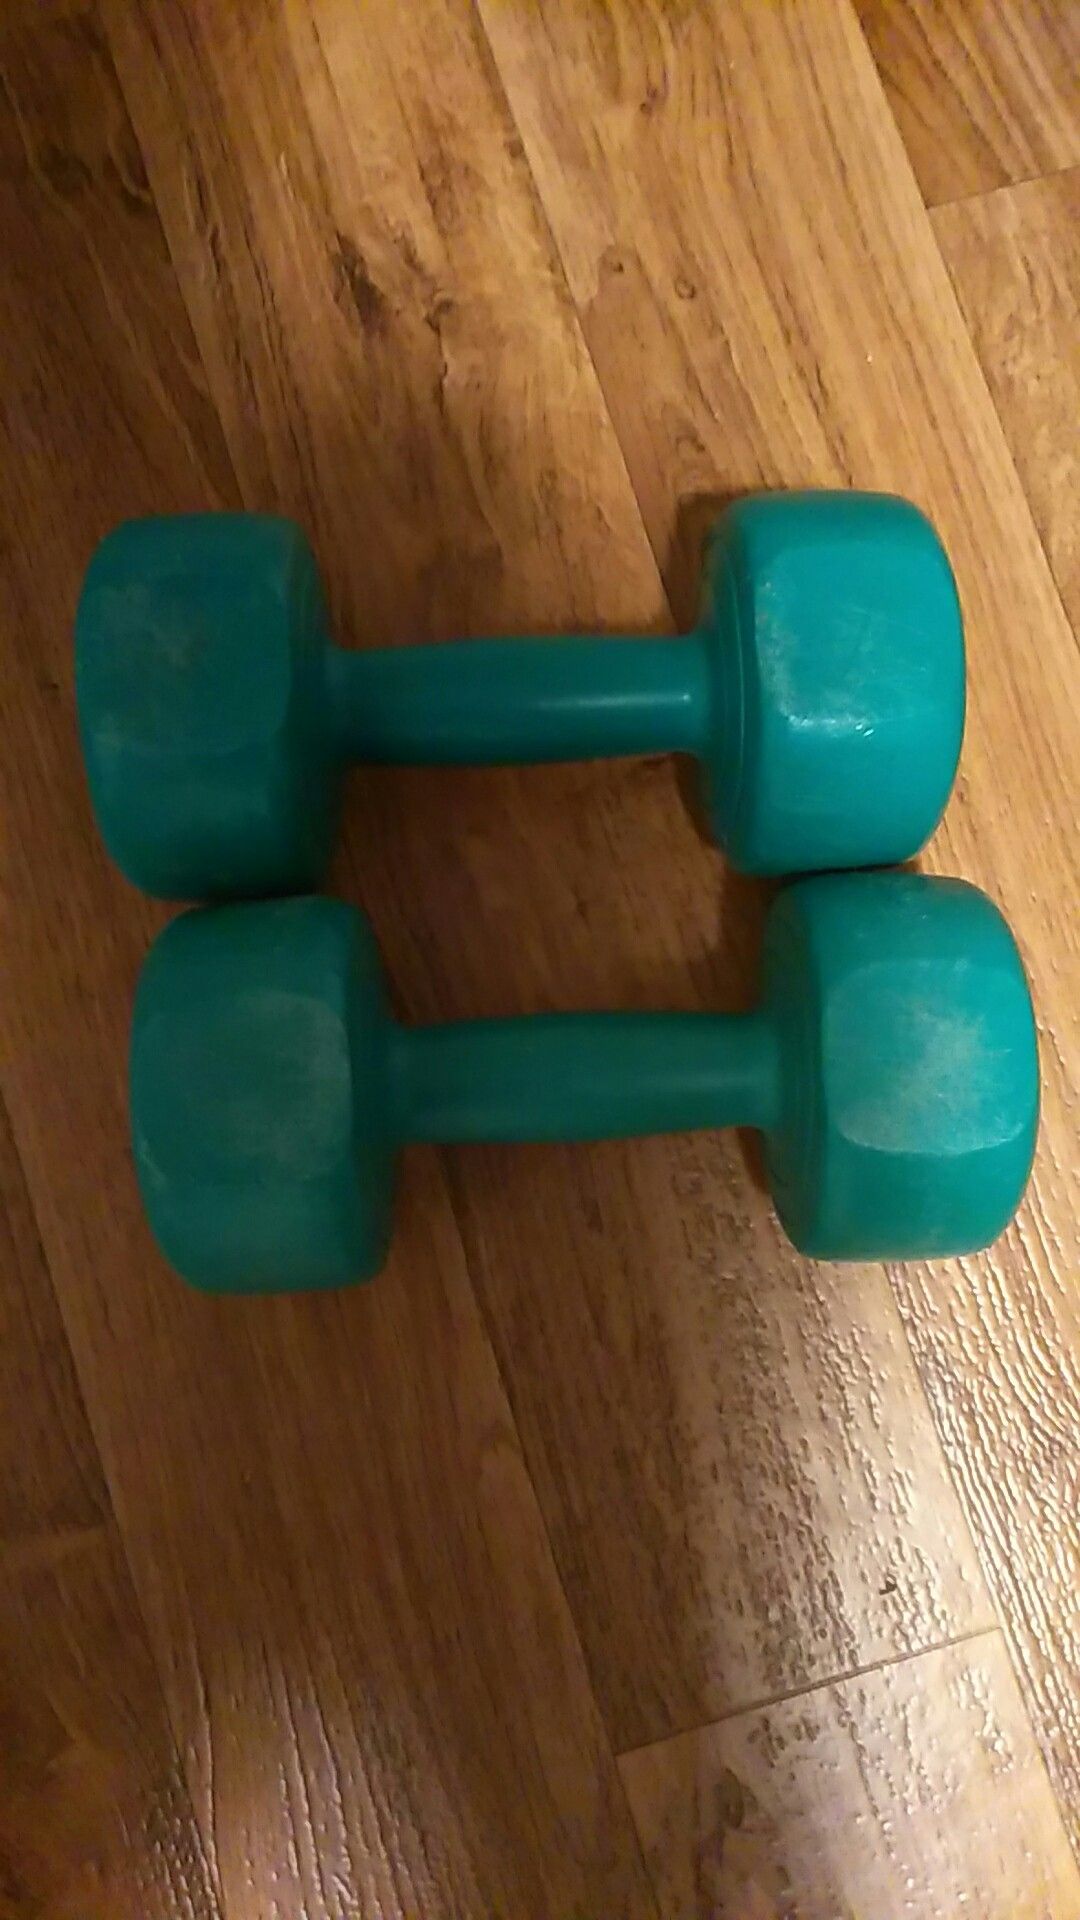 5lbs weights $5